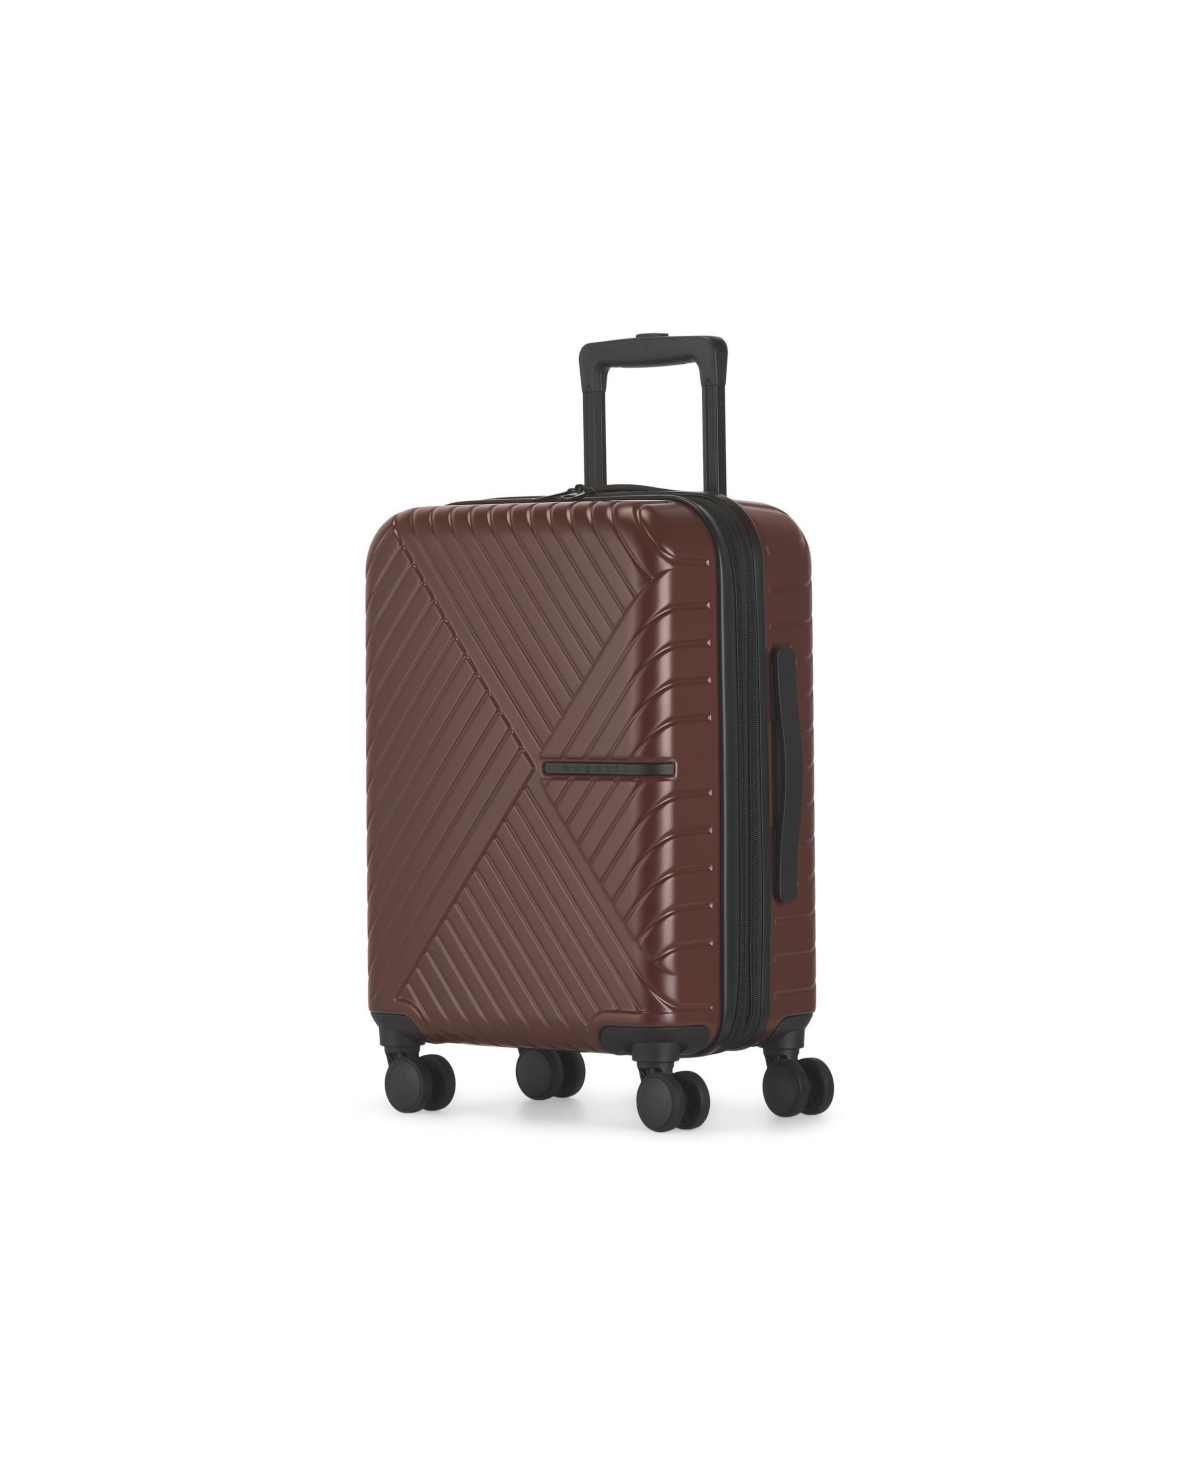 Bugatti Berlin Carry-on Abs Luggage In Mink